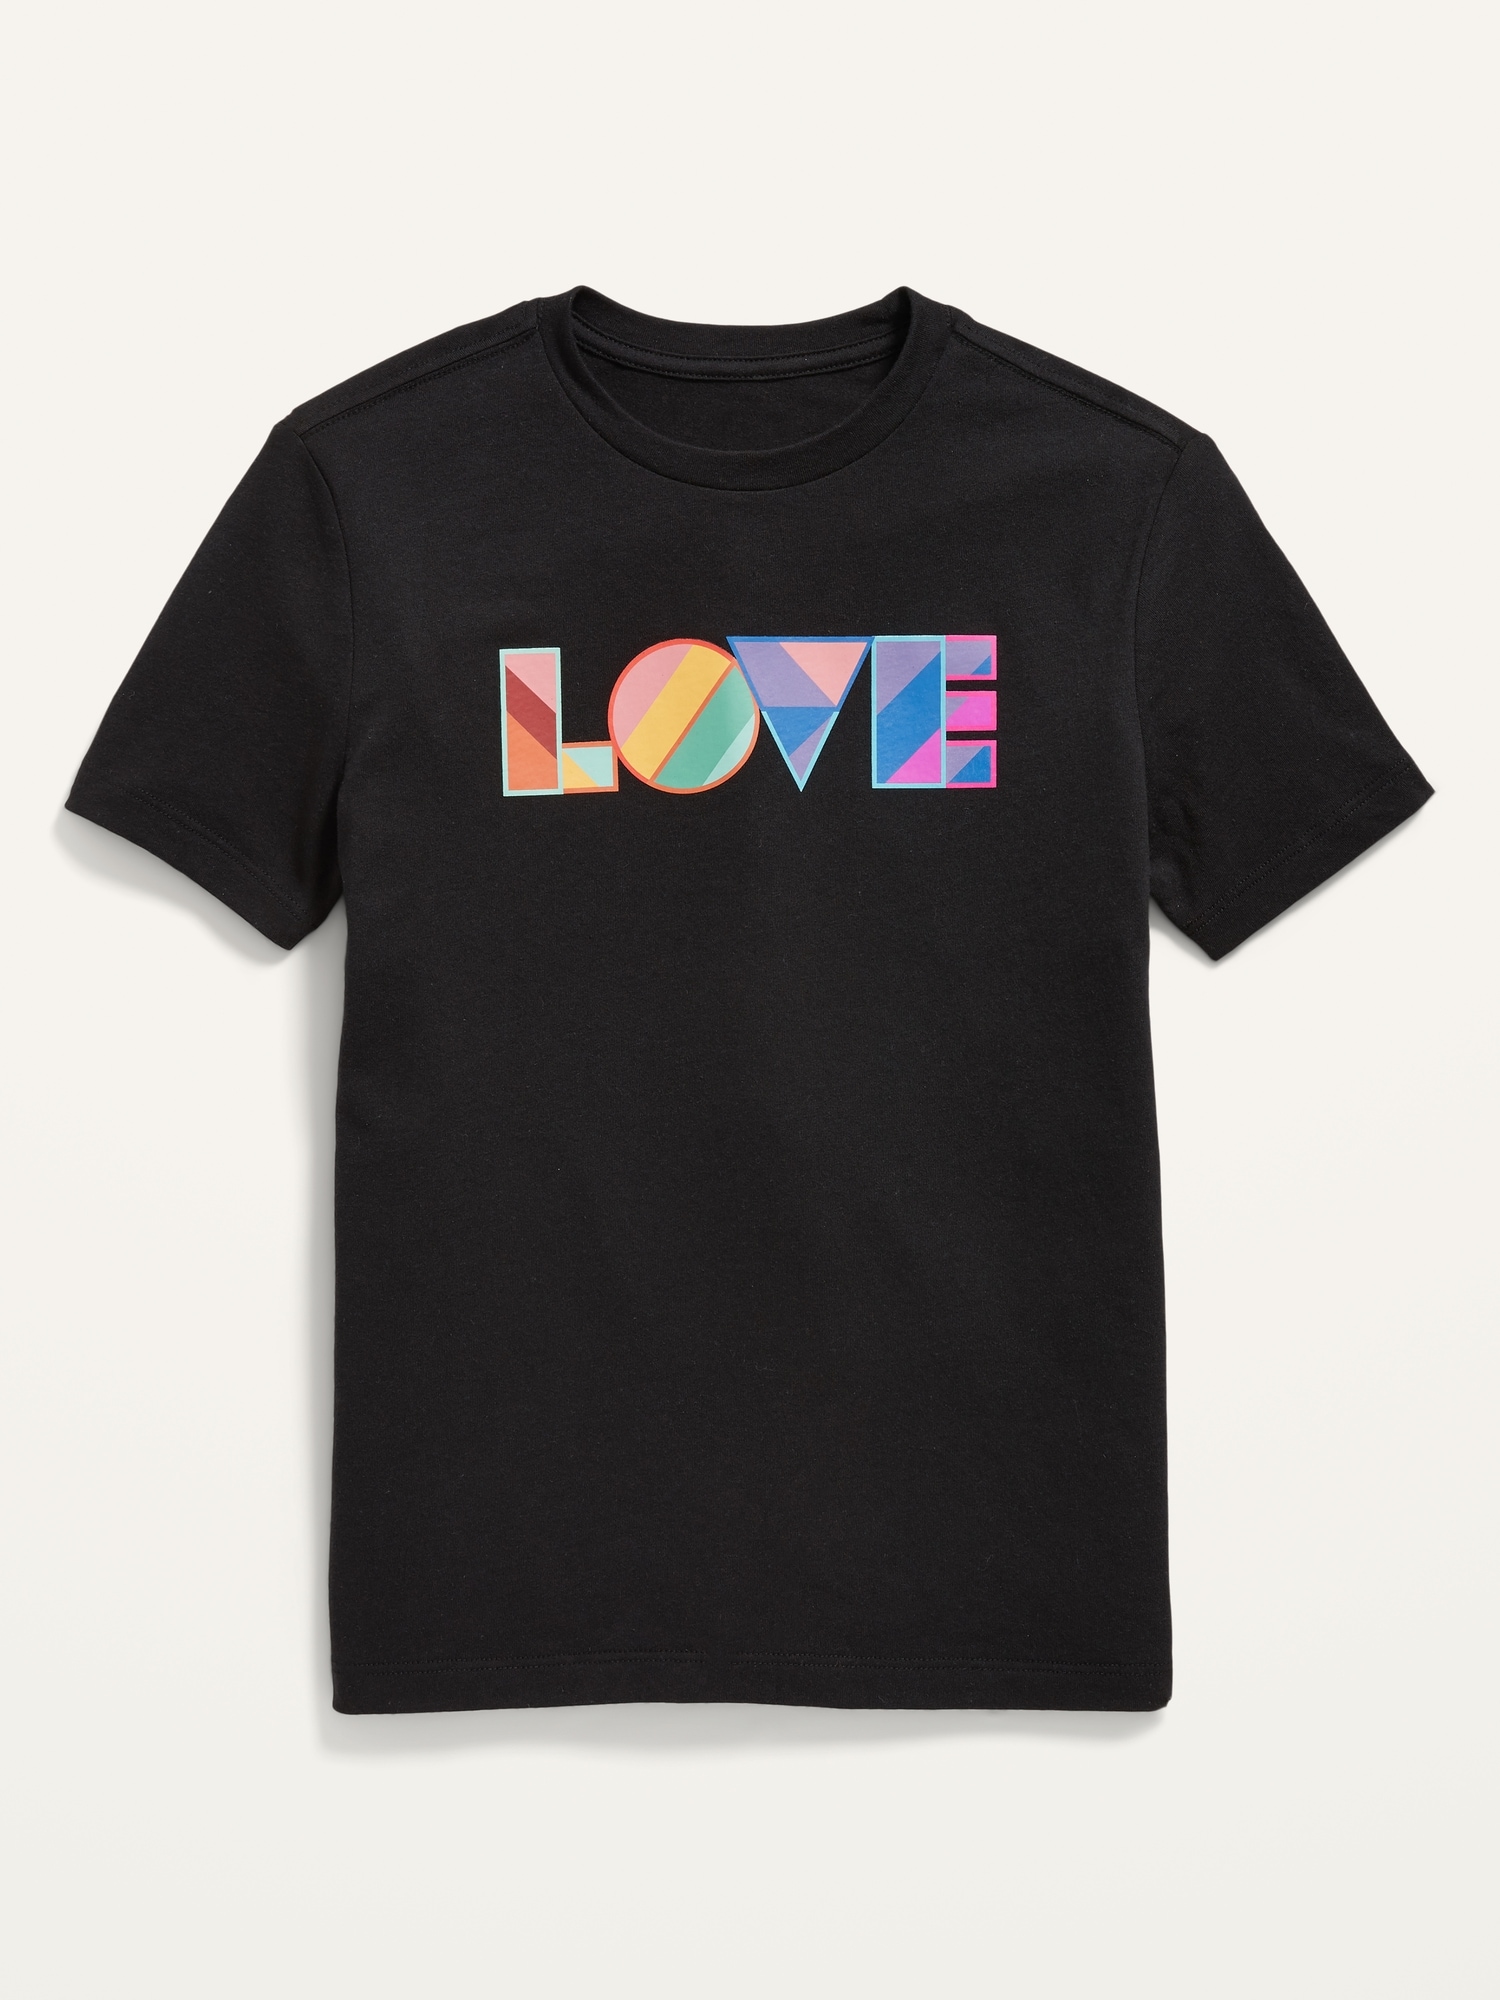 Matching Pride Graphic T-Shirt for Kids